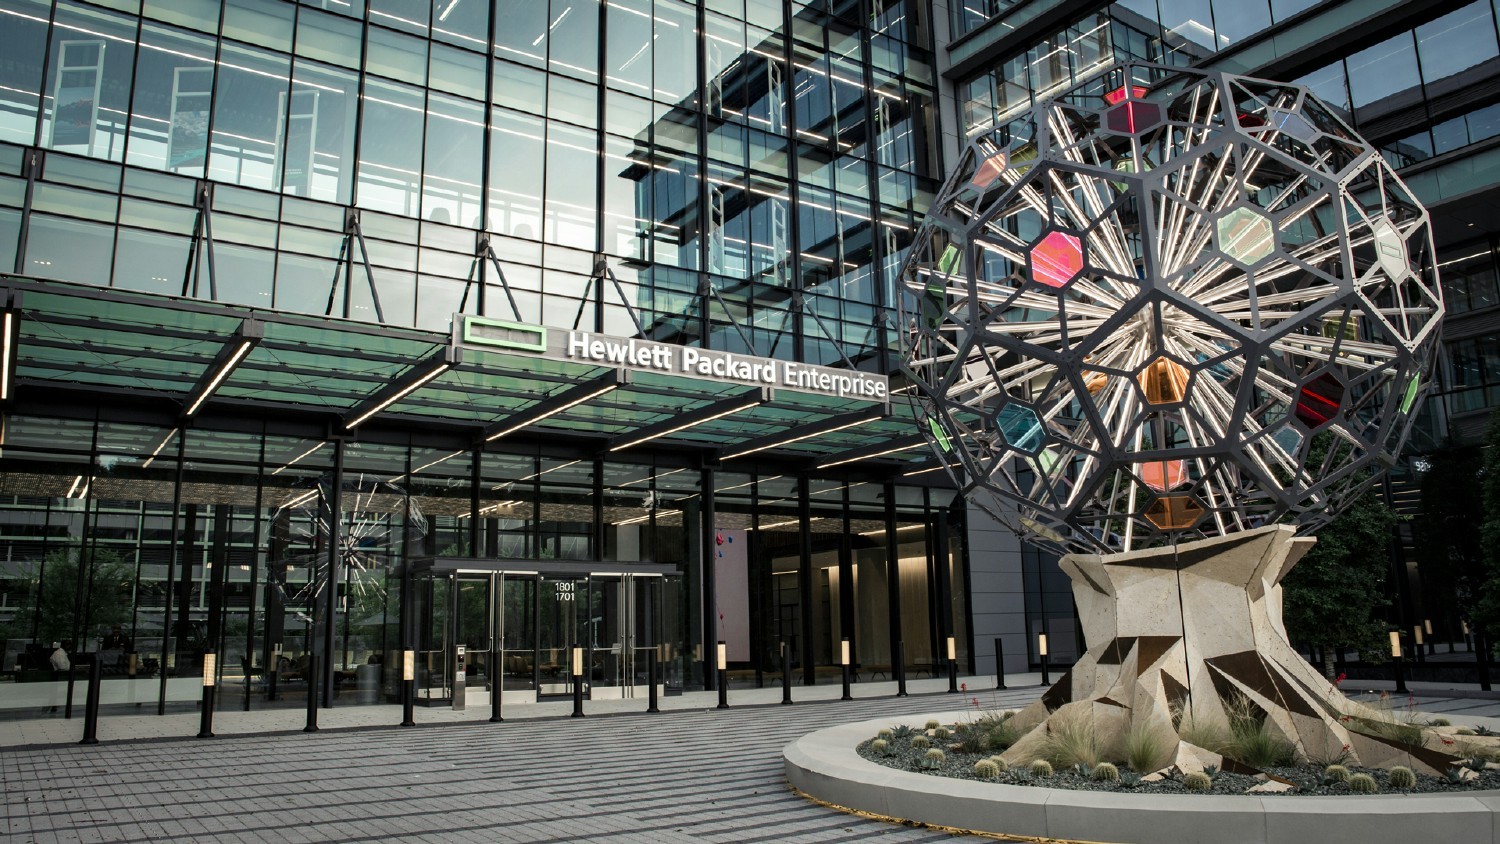 Sculpture outside the main entrance that represents sustainable transformation at HPE's headquarters